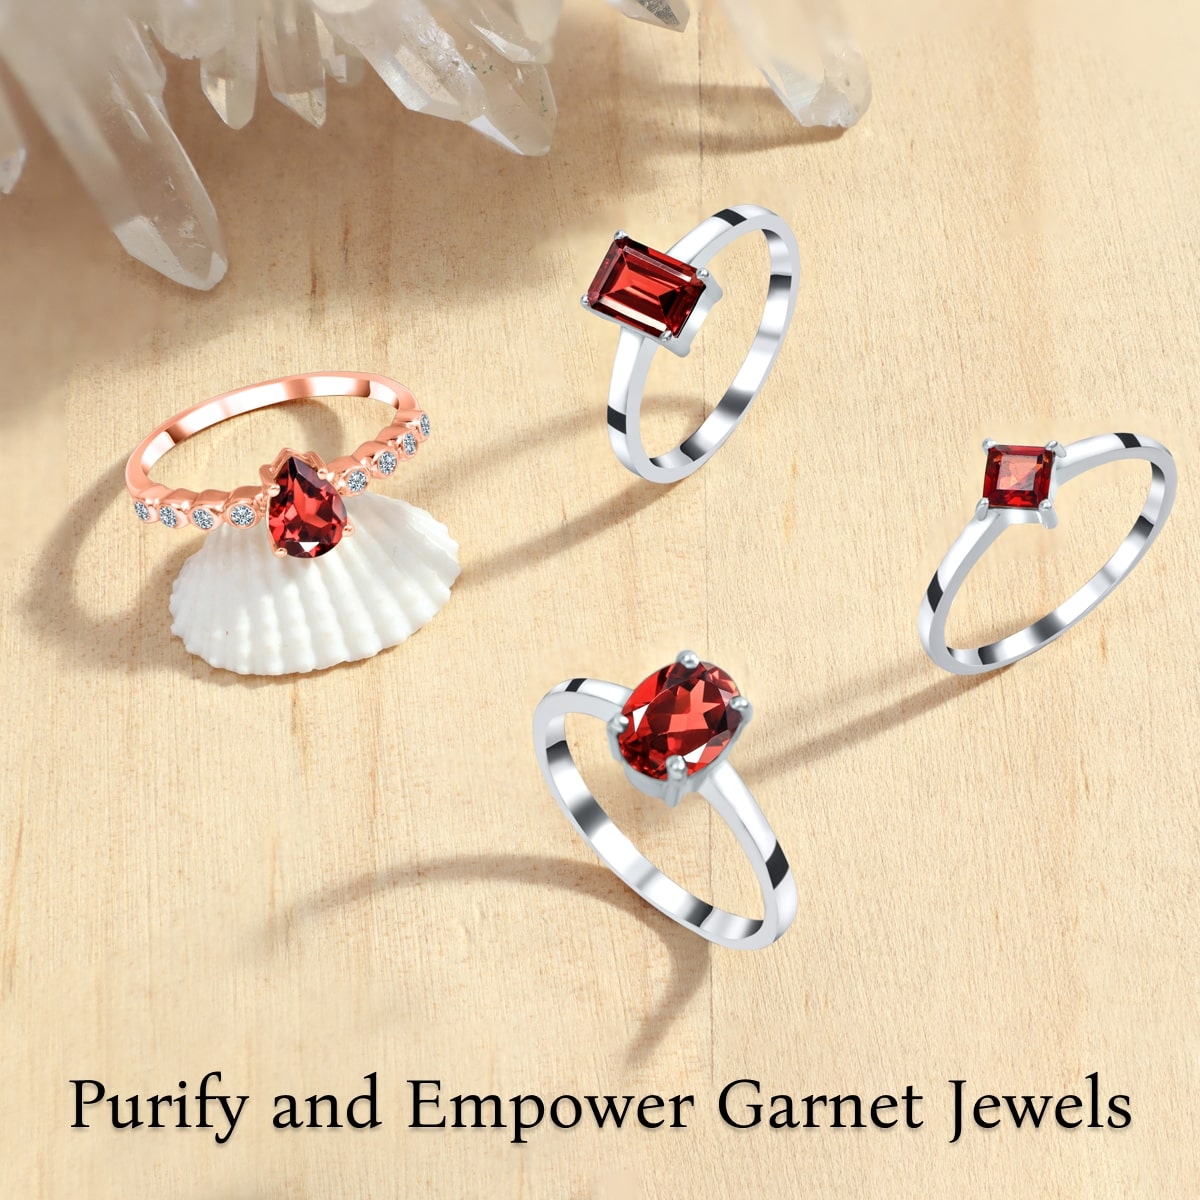 Cleansing and Charging Your Garnet Jewelry